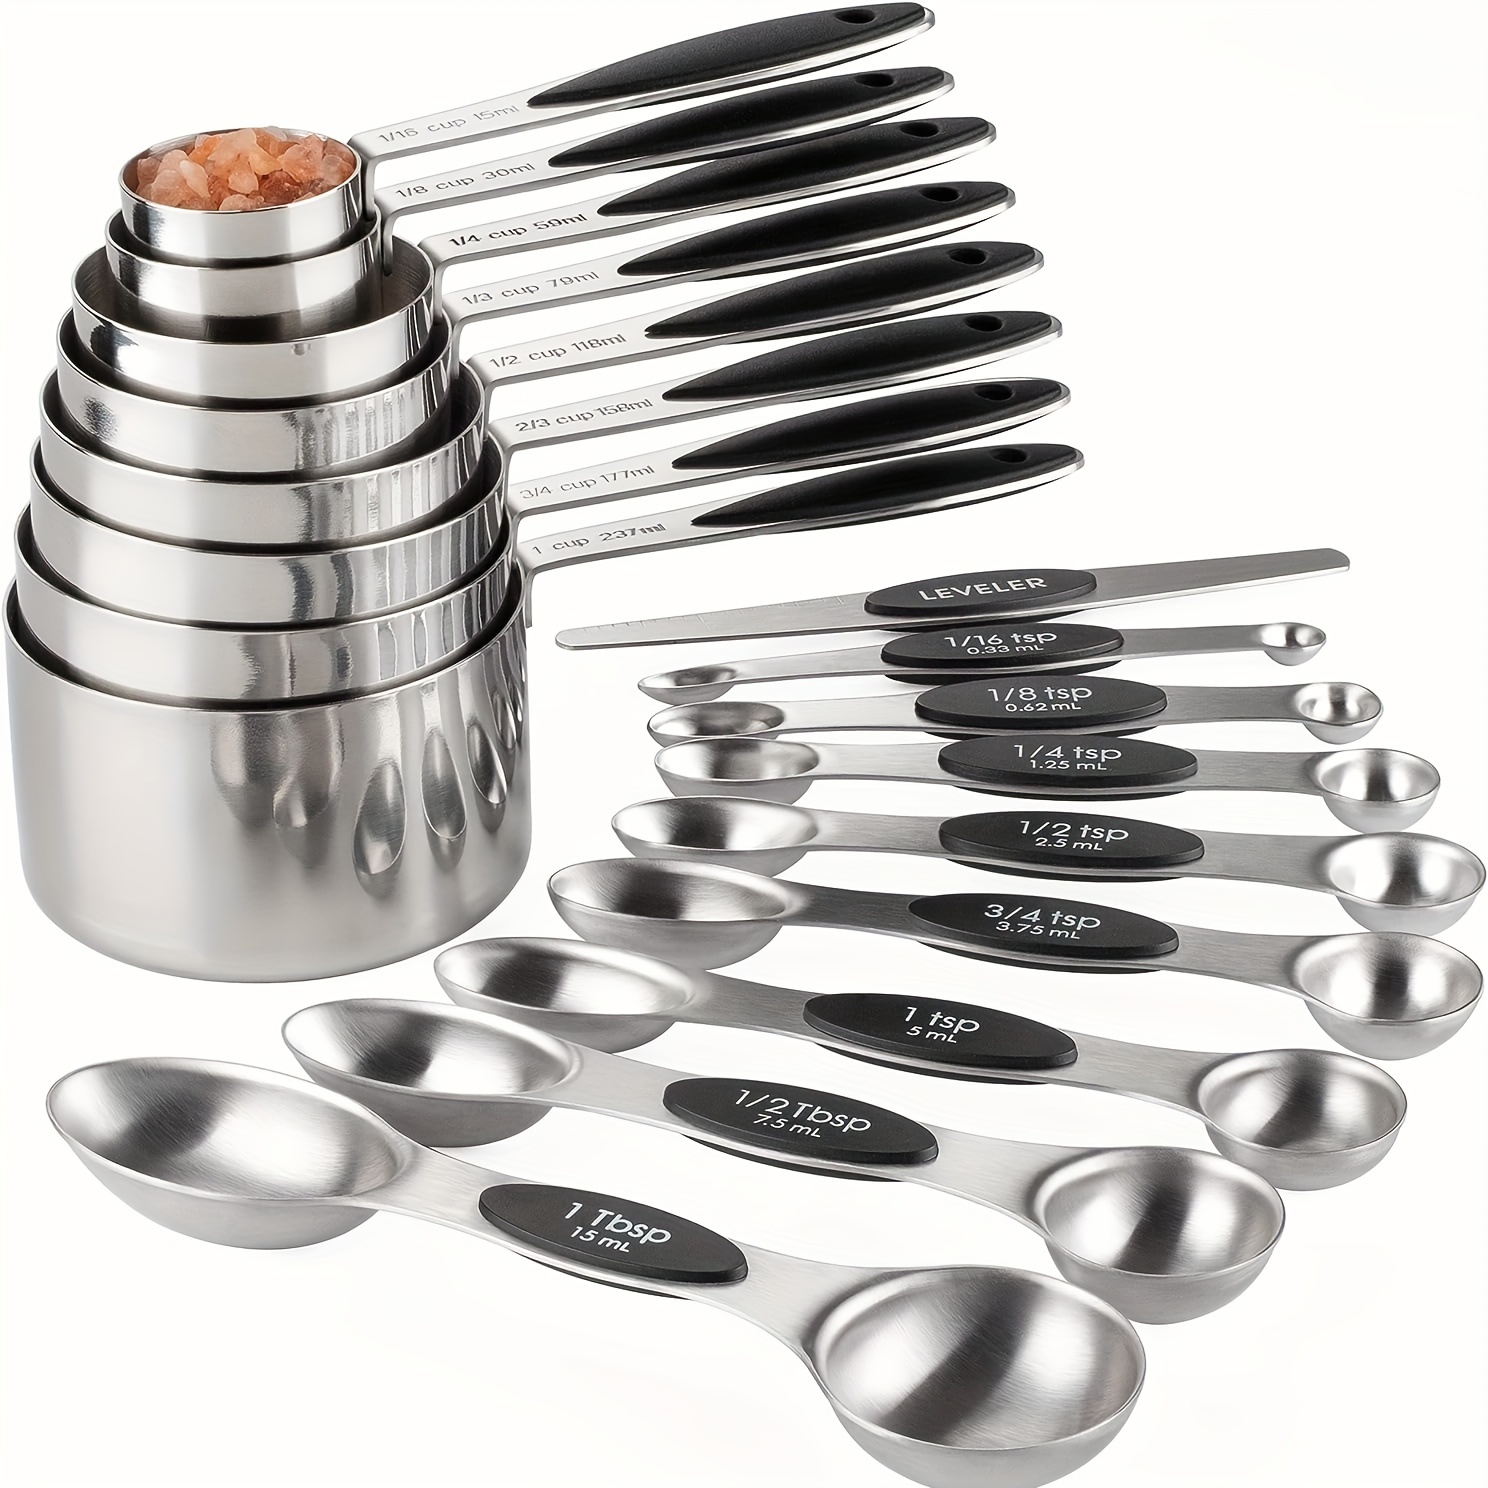 

9/17pcs, Stainless Steel Measuring Cup And Spoon Set, Heavy-duty Measuring Cups, Double-sided Magnetic Measuring Spoons, Used For Dry And Liquid Ingredients, Baking Tools, Kitchen Stuff